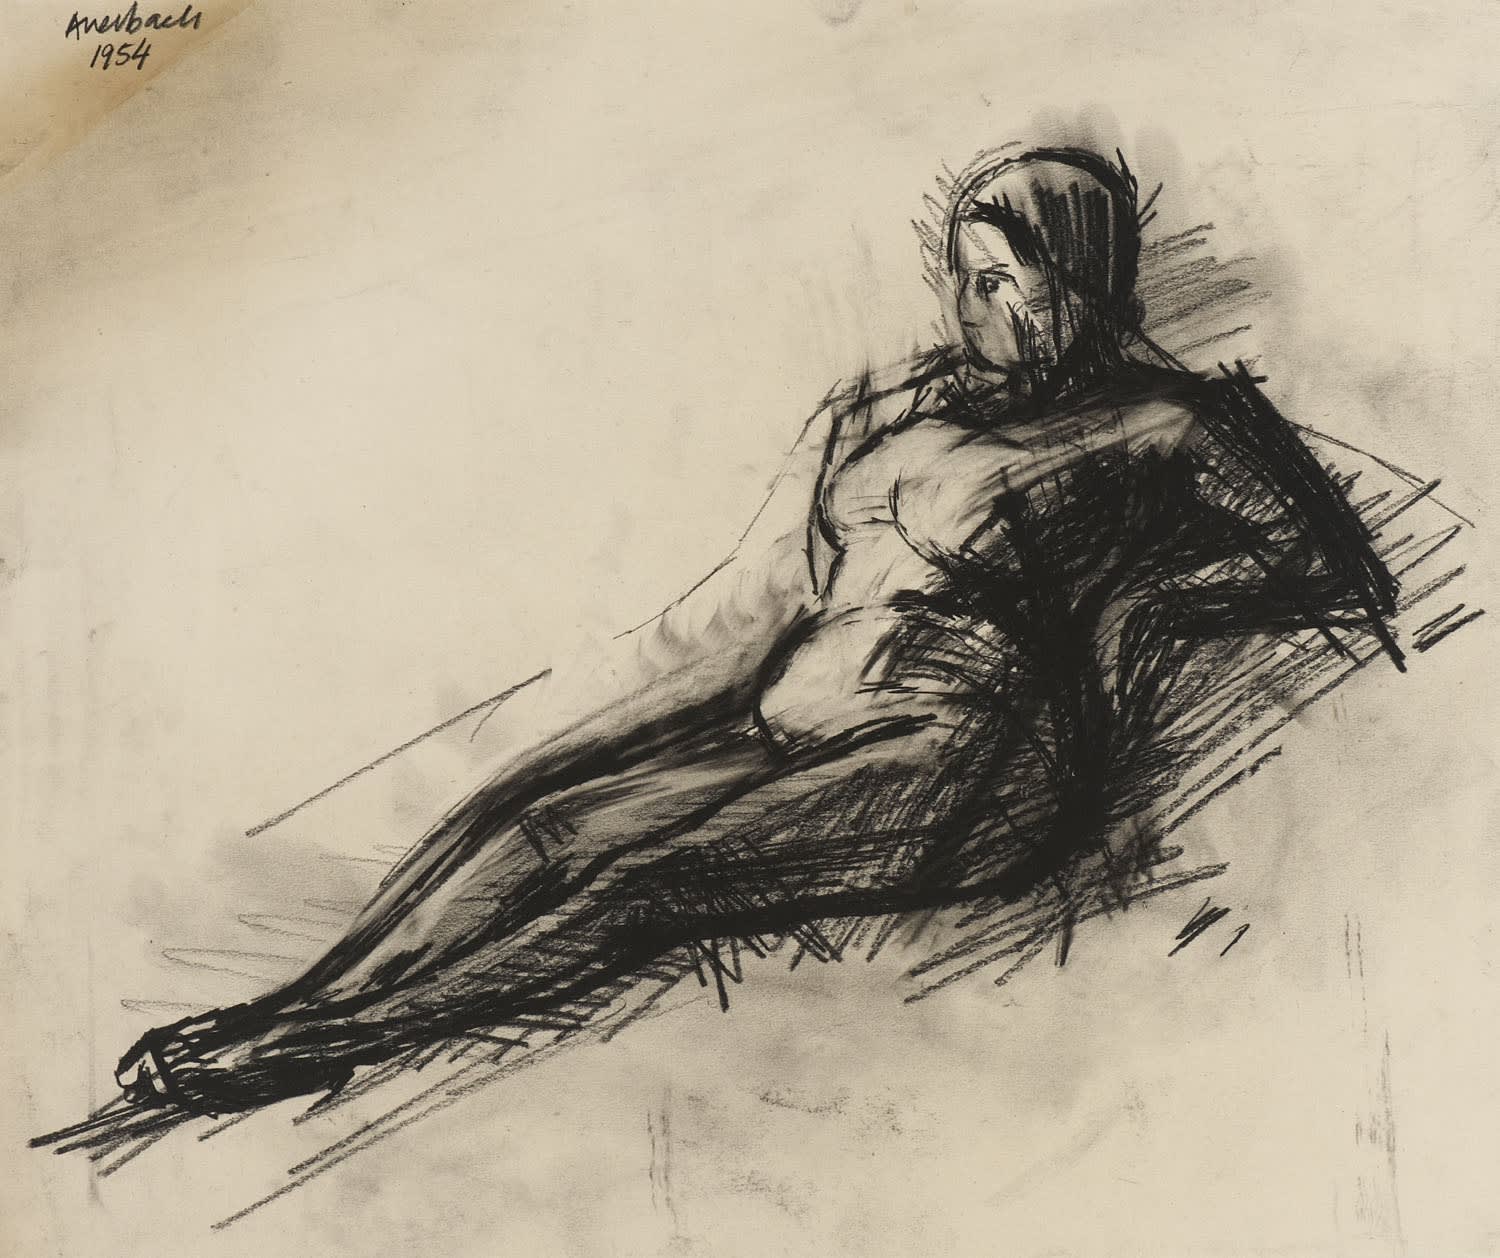 Frank Auerbach (1931-) Nude 1954 Charcoal on paper 45.5 x 54.5 cm © Frank Auerbach, courtesy Marlborough Fine Art To see and discover more about this artist click here